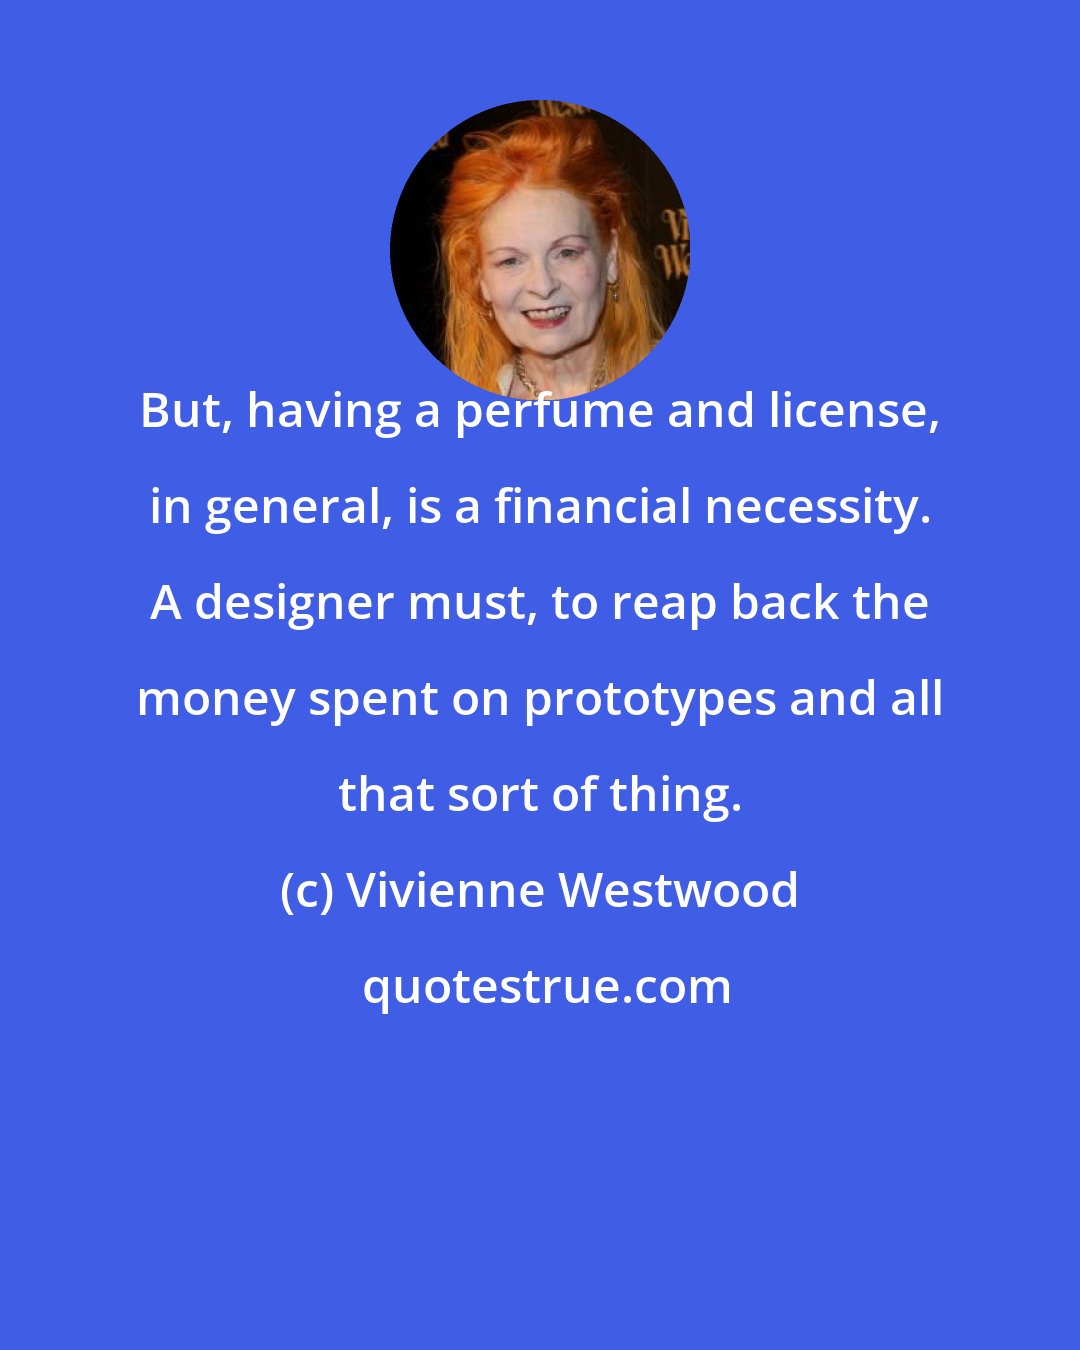 Vivienne Westwood: But, having a perfume and license, in general, is a financial necessity. A designer must, to reap back the money spent on prototypes and all that sort of thing.